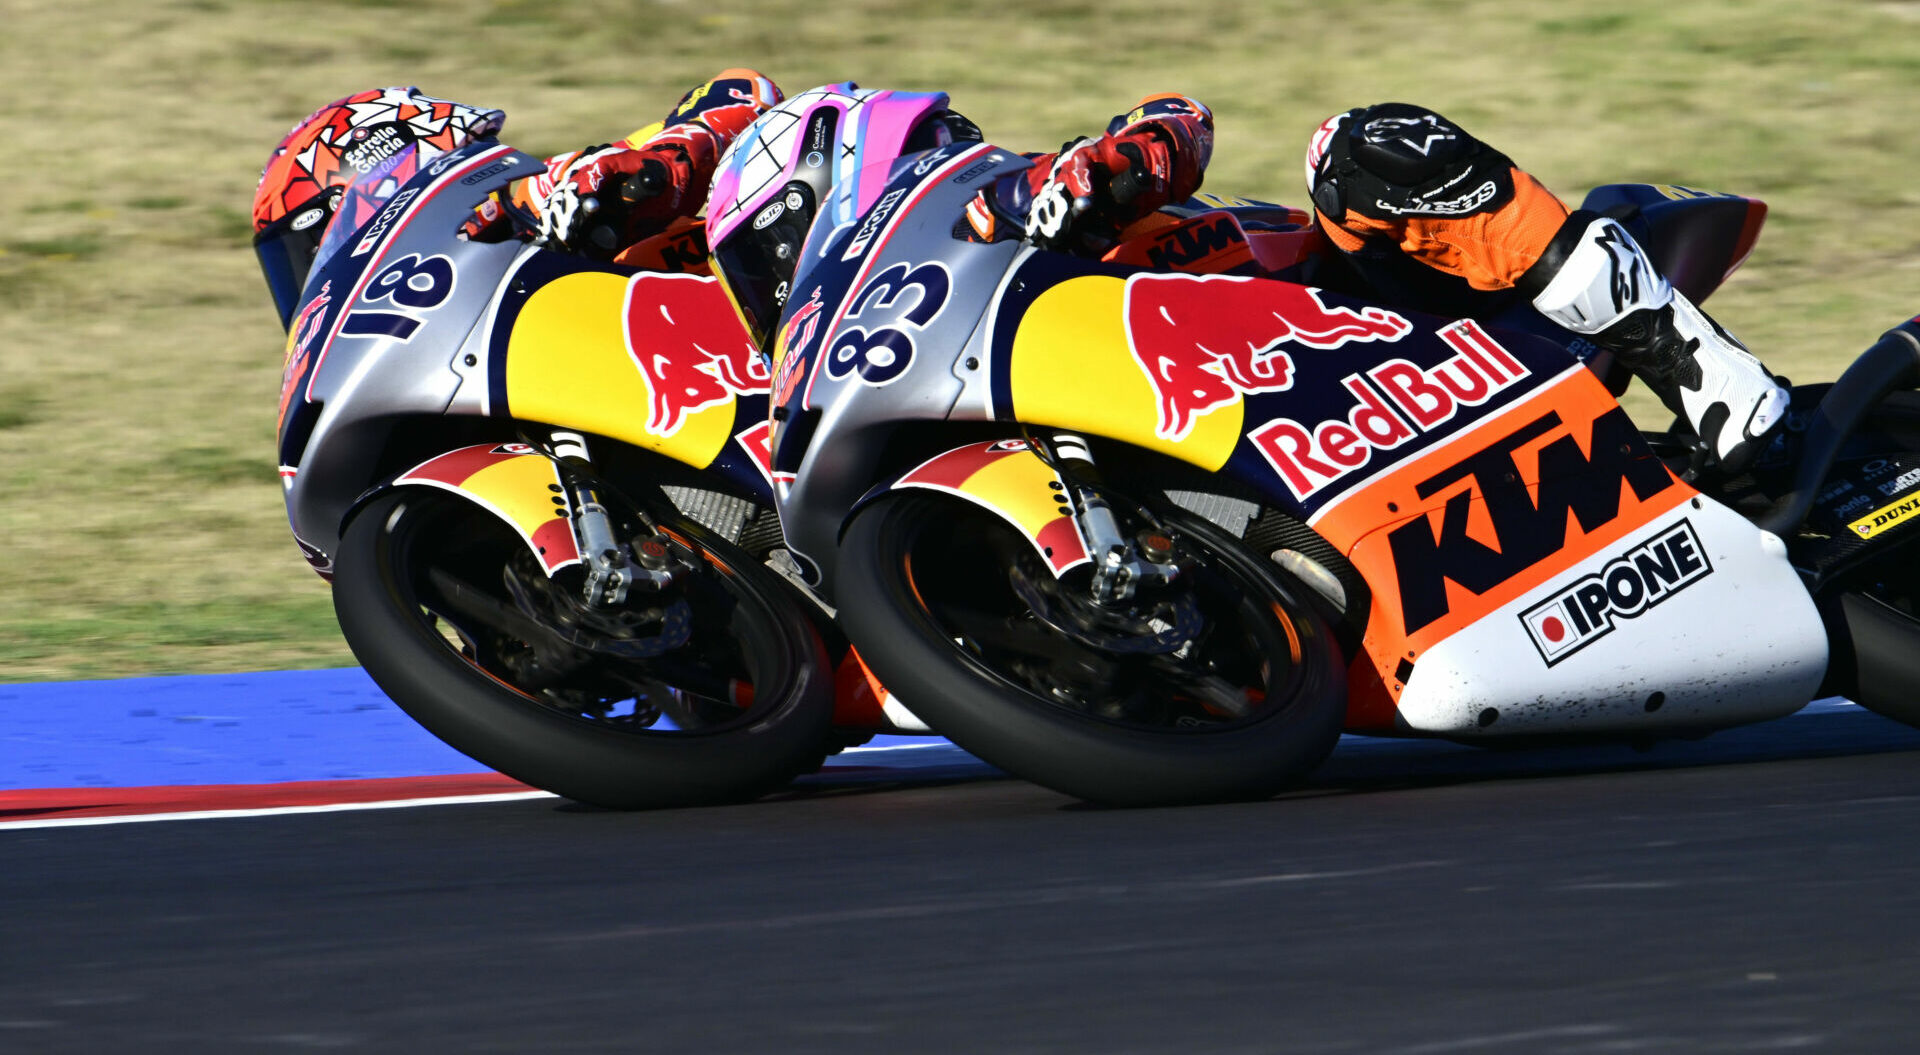 Red Bull MotoGP Rookies Cup Race One Results From Misano